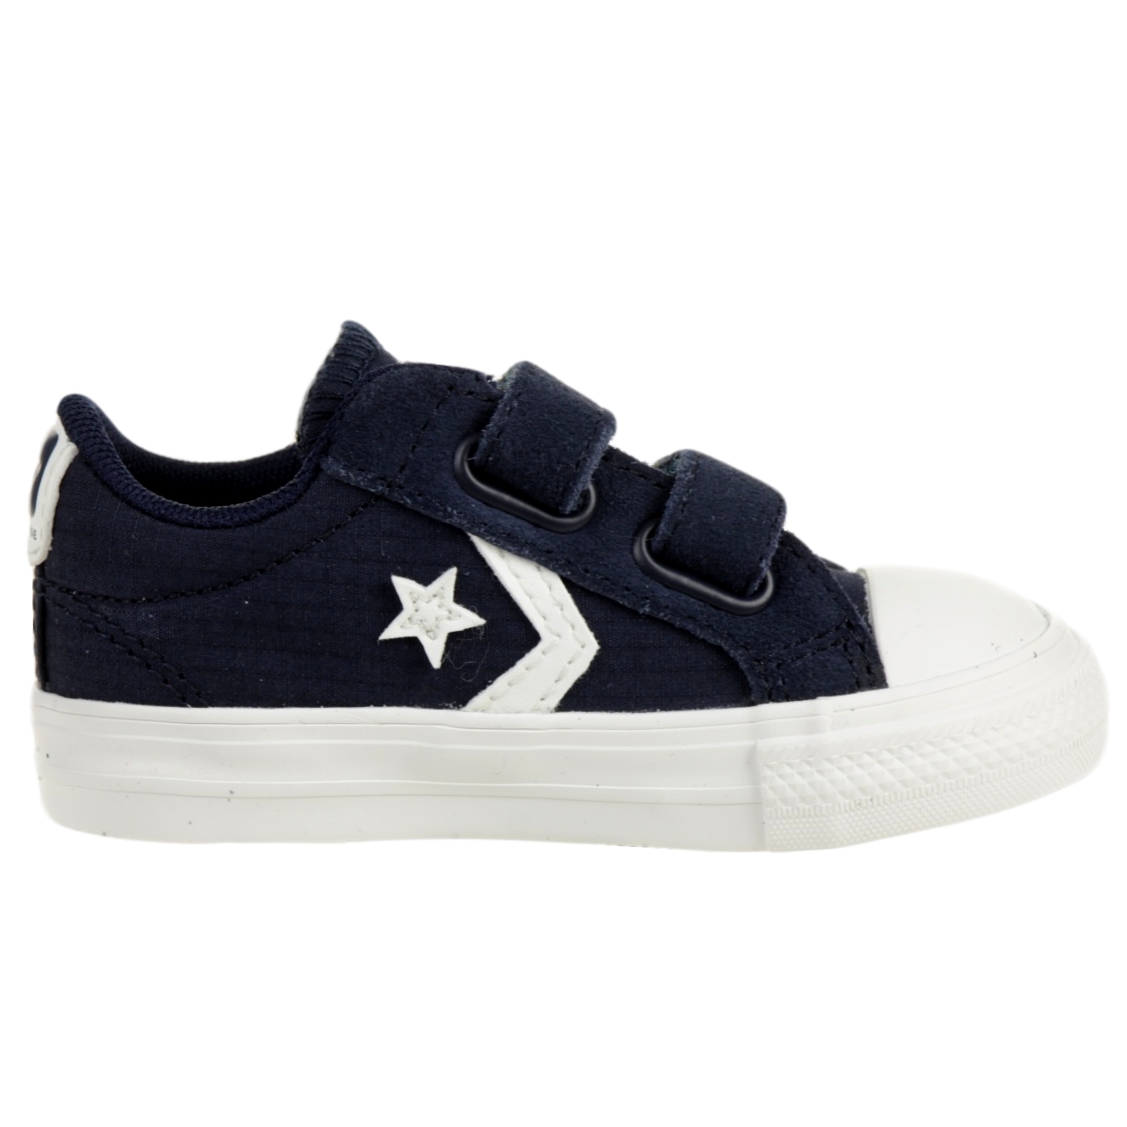 Converse CTAS 2V OX Ripstop Easy-On Star Player Low Top Kinder Sneaker 767550C Blau